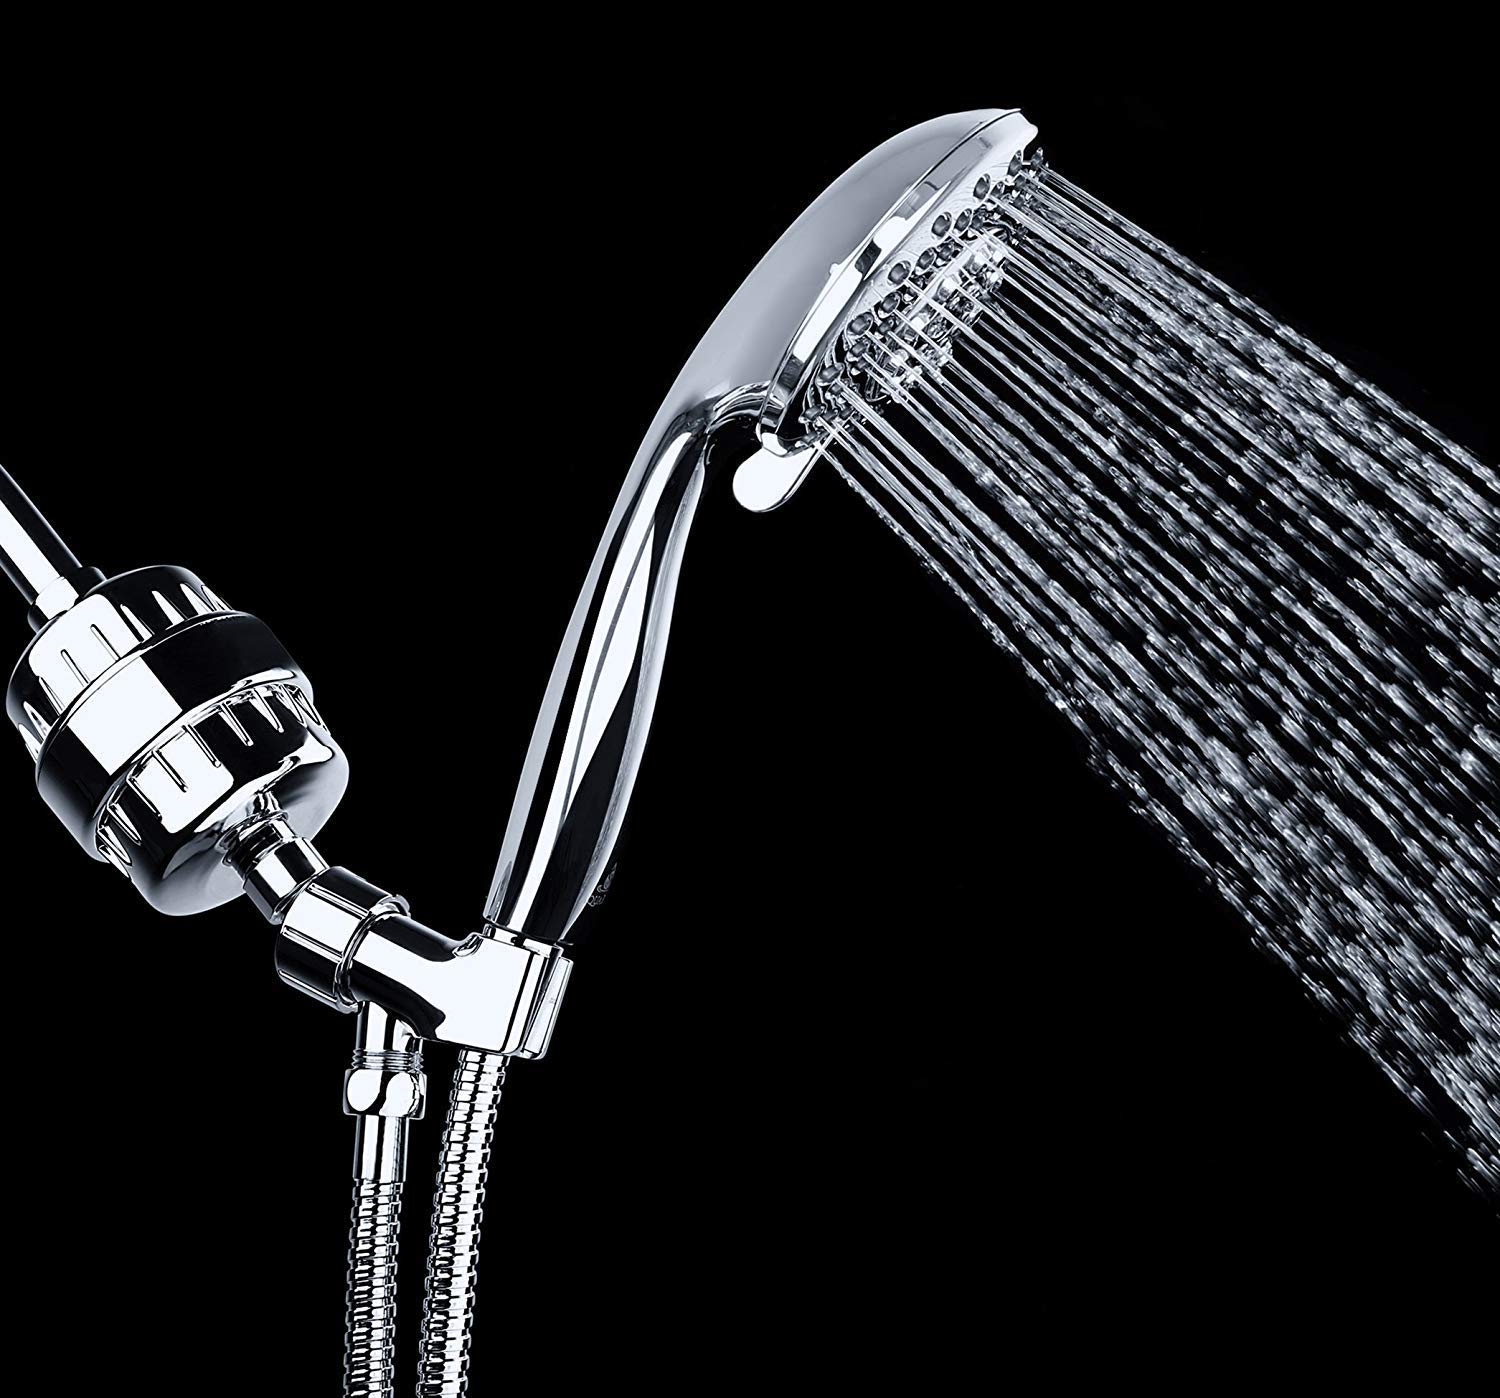 AquaBliss Multi-Stage Shower Filter w/ Replaceable Cartridge – Transform Itching, Eczema & Acne into Glowing Hair, Nails and Skin Fast. Chrome SF220